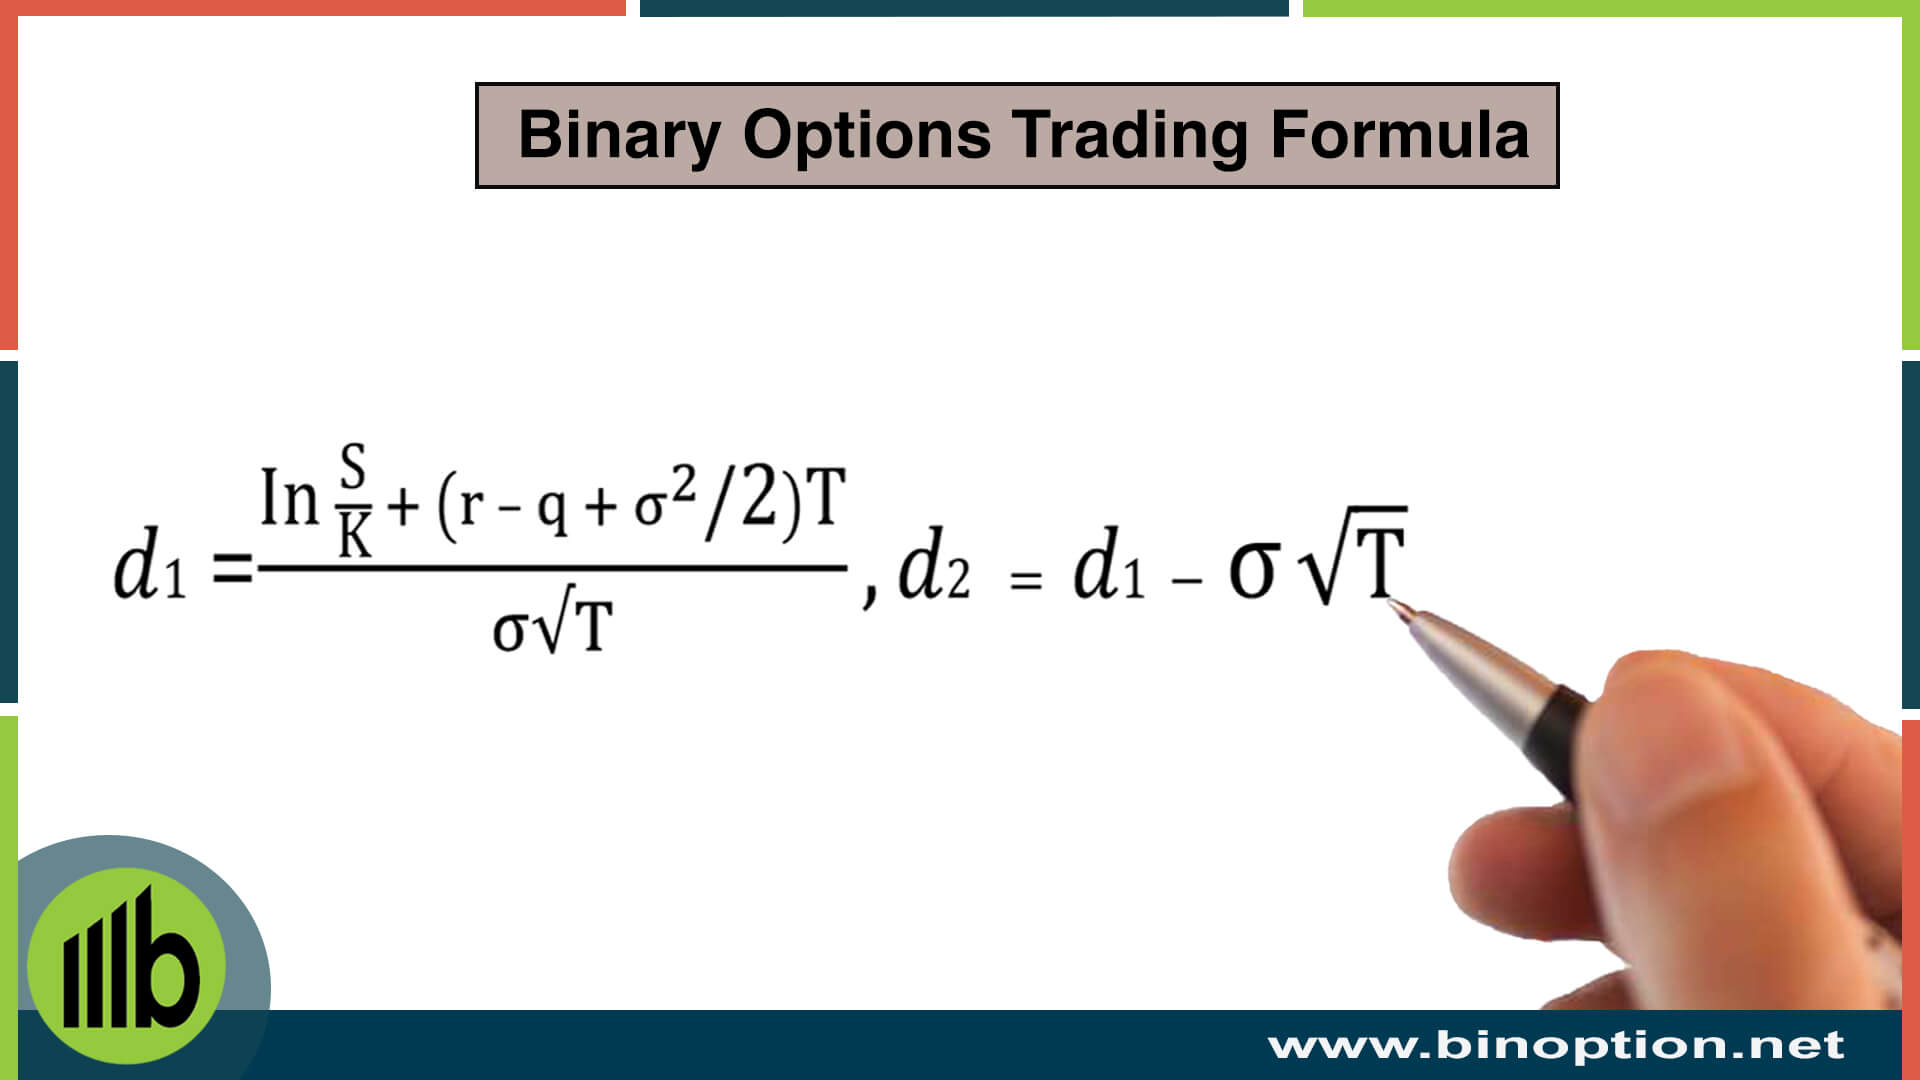 Mathematical strategies for binary options trading glass of forex prices online